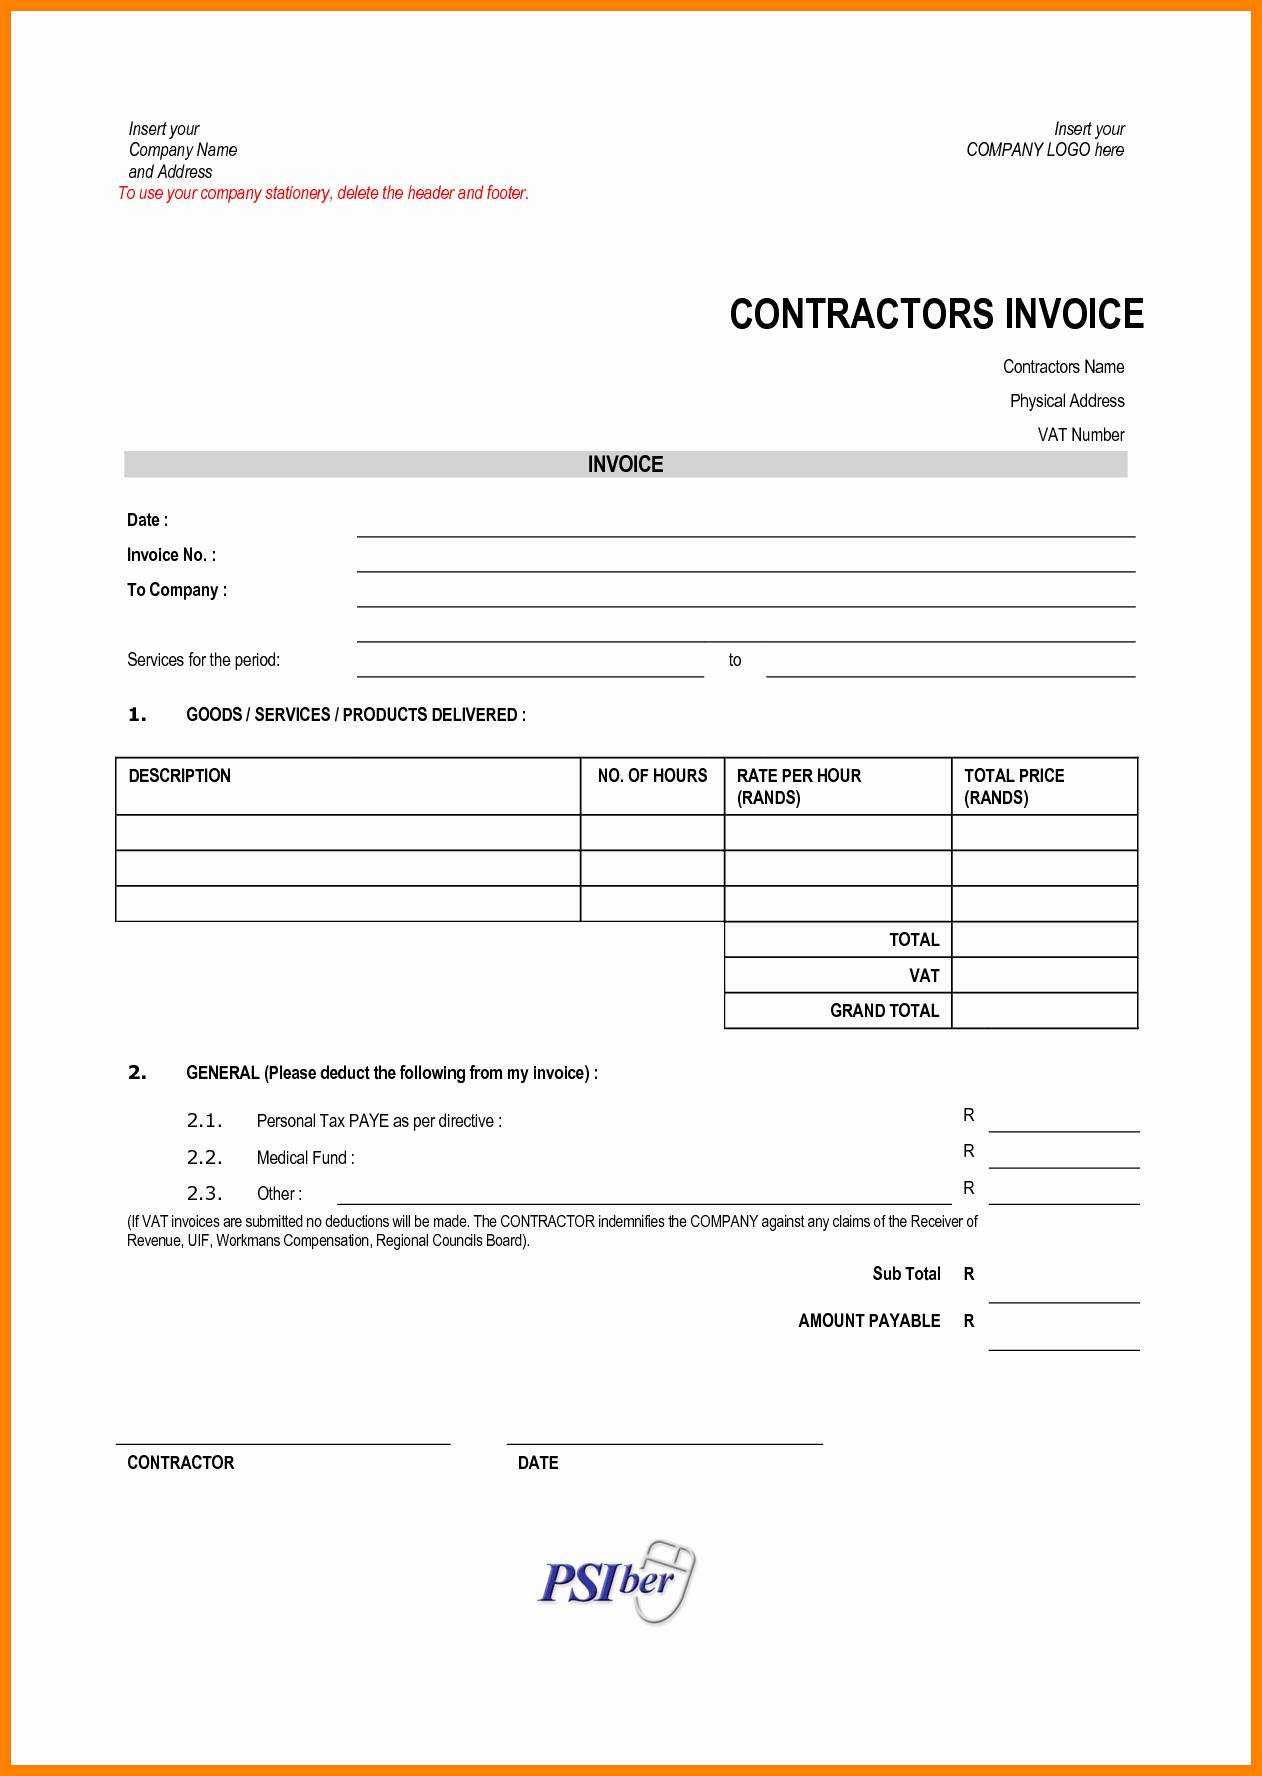 35 How To Create Contractor Vat Invoice Template PSD File by Contractor Vat Invoice Template